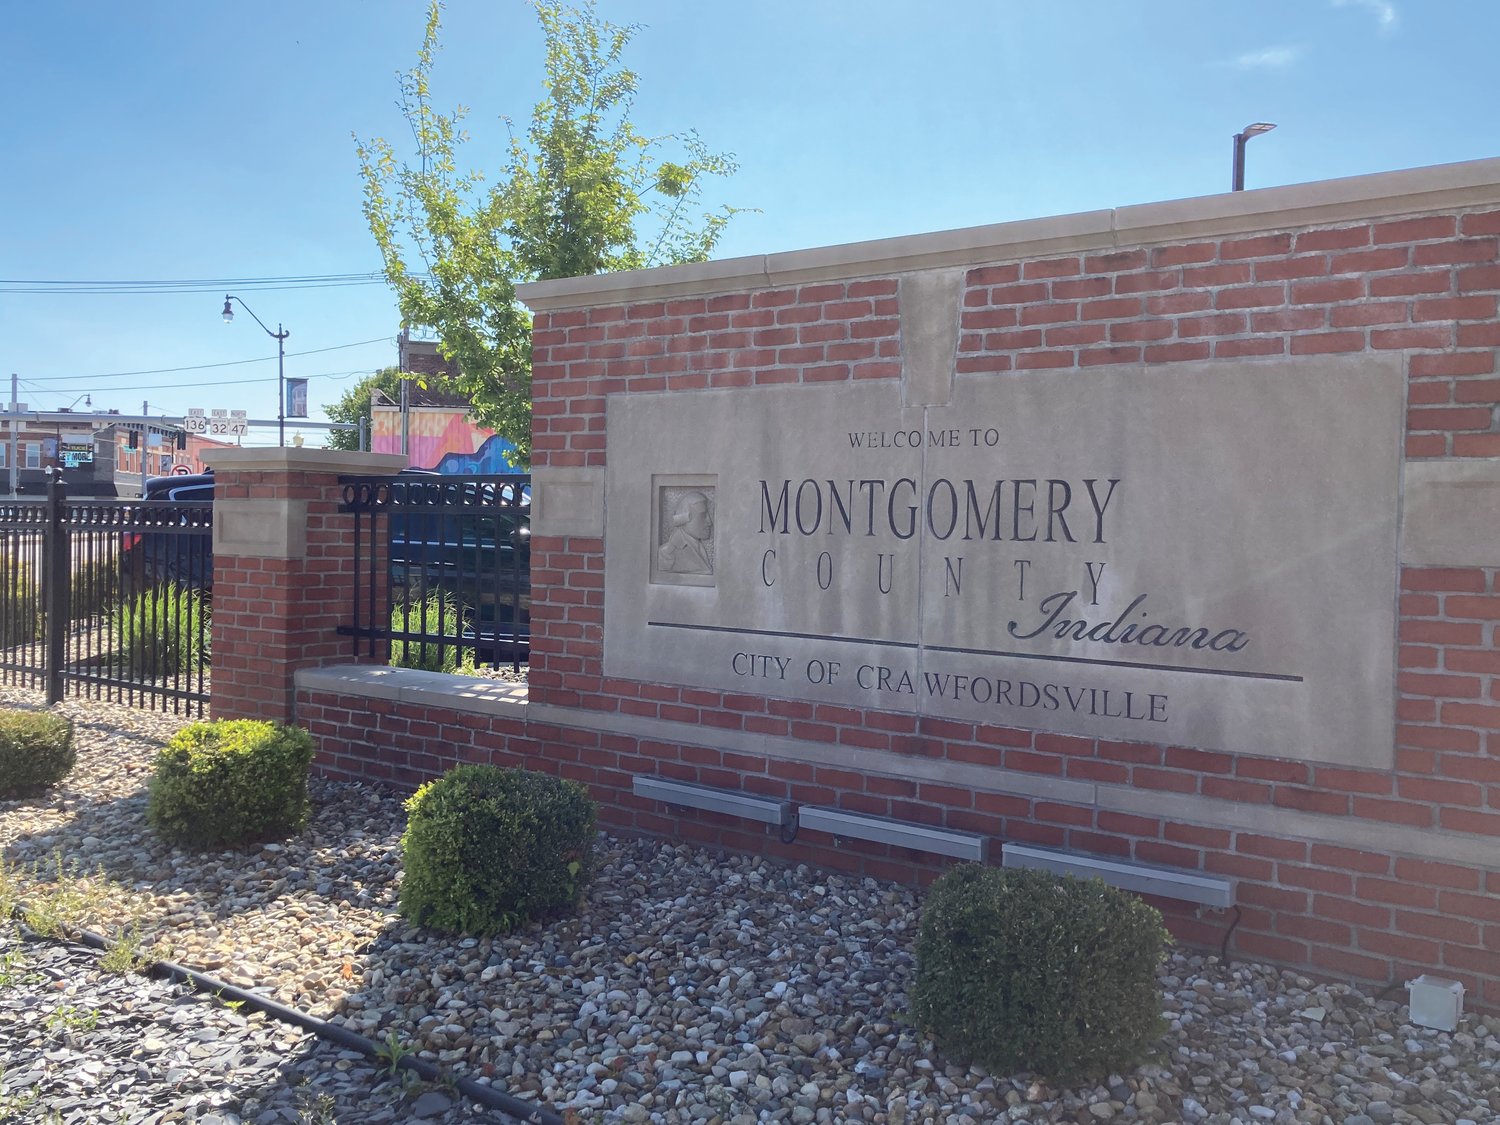 Gateway signs similar to the one outside the Montgomery County Courthouse are part of a wayfinding project that received a financial commitment from the Montgomery County Council Tuesday.